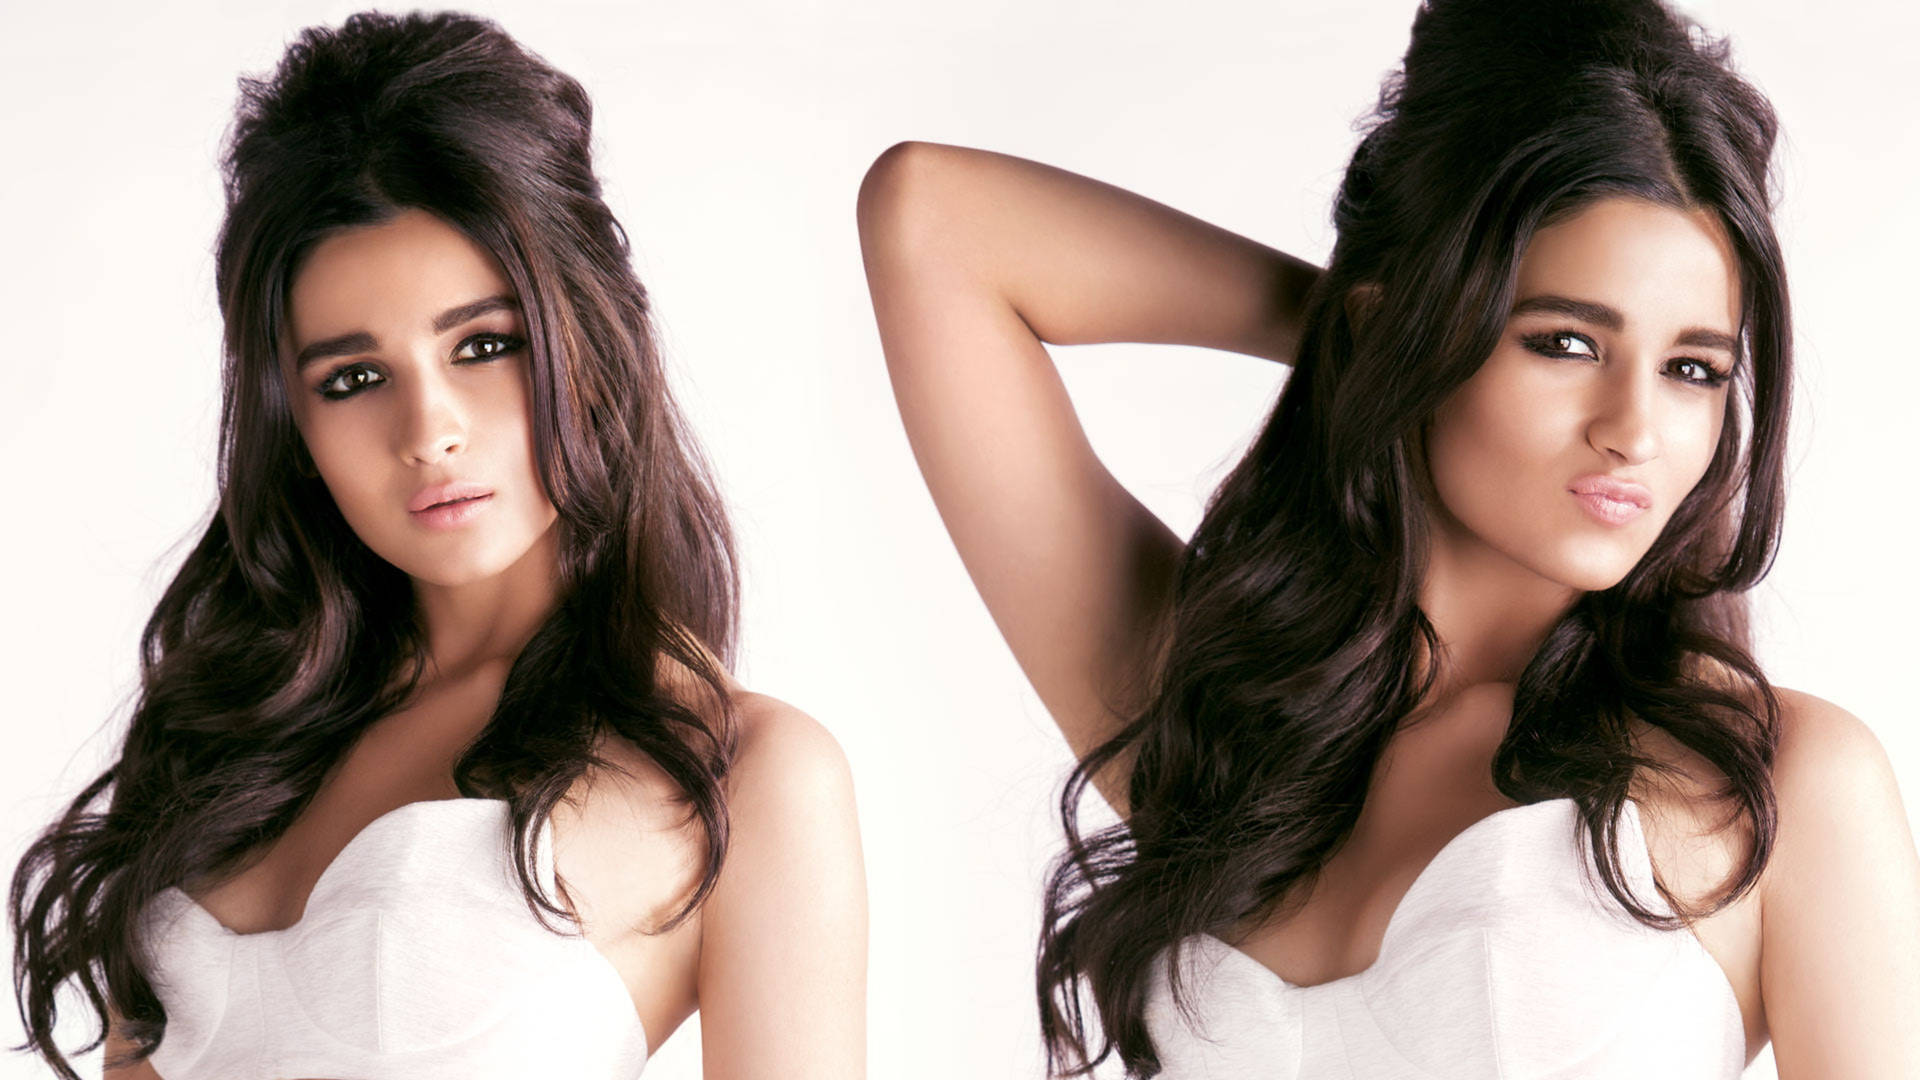 Aliabhatt Sexy Vogue 2014: Alia Bhatt Sexy Vogue 2014. (the Sentence Is Already In English And Does Not Need To Be Translated.) Wallpaper